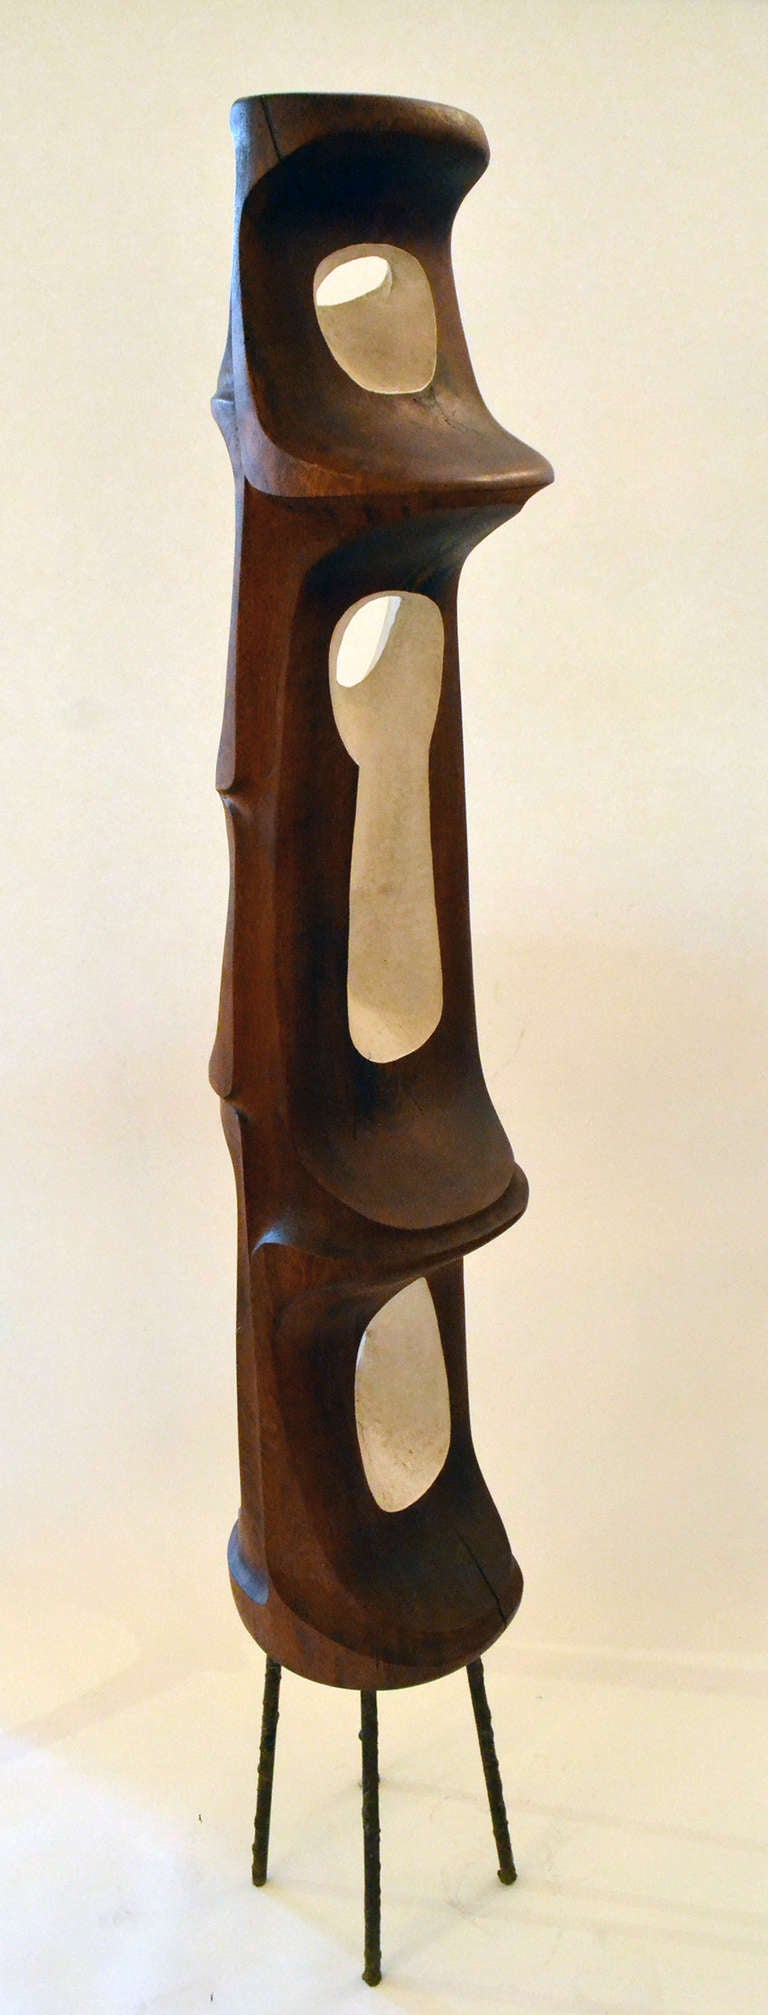 American Totemic Hand-Carved Wood Sculpture by John Risley, USA, 1960s